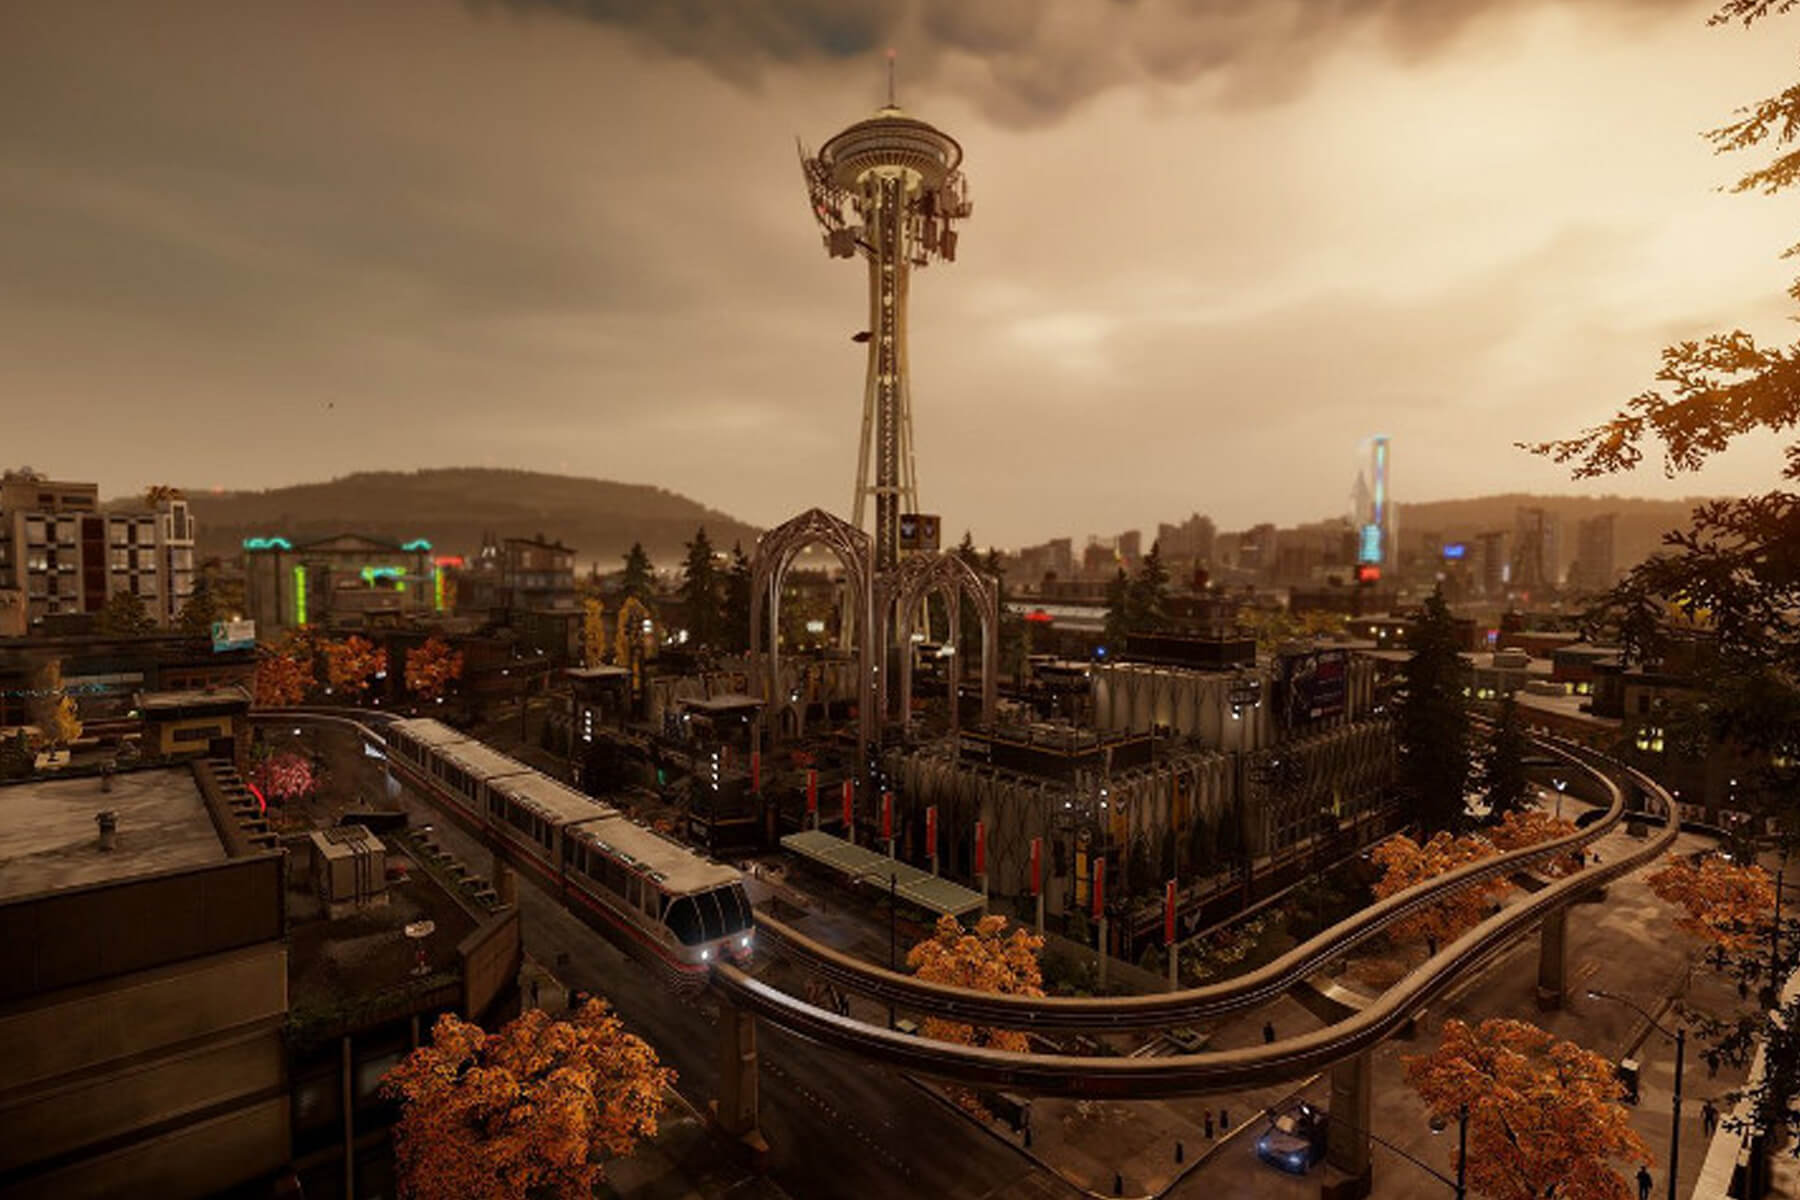 Screenshot from Infamous Second Son featuring the Seattle Space Needle and monorail